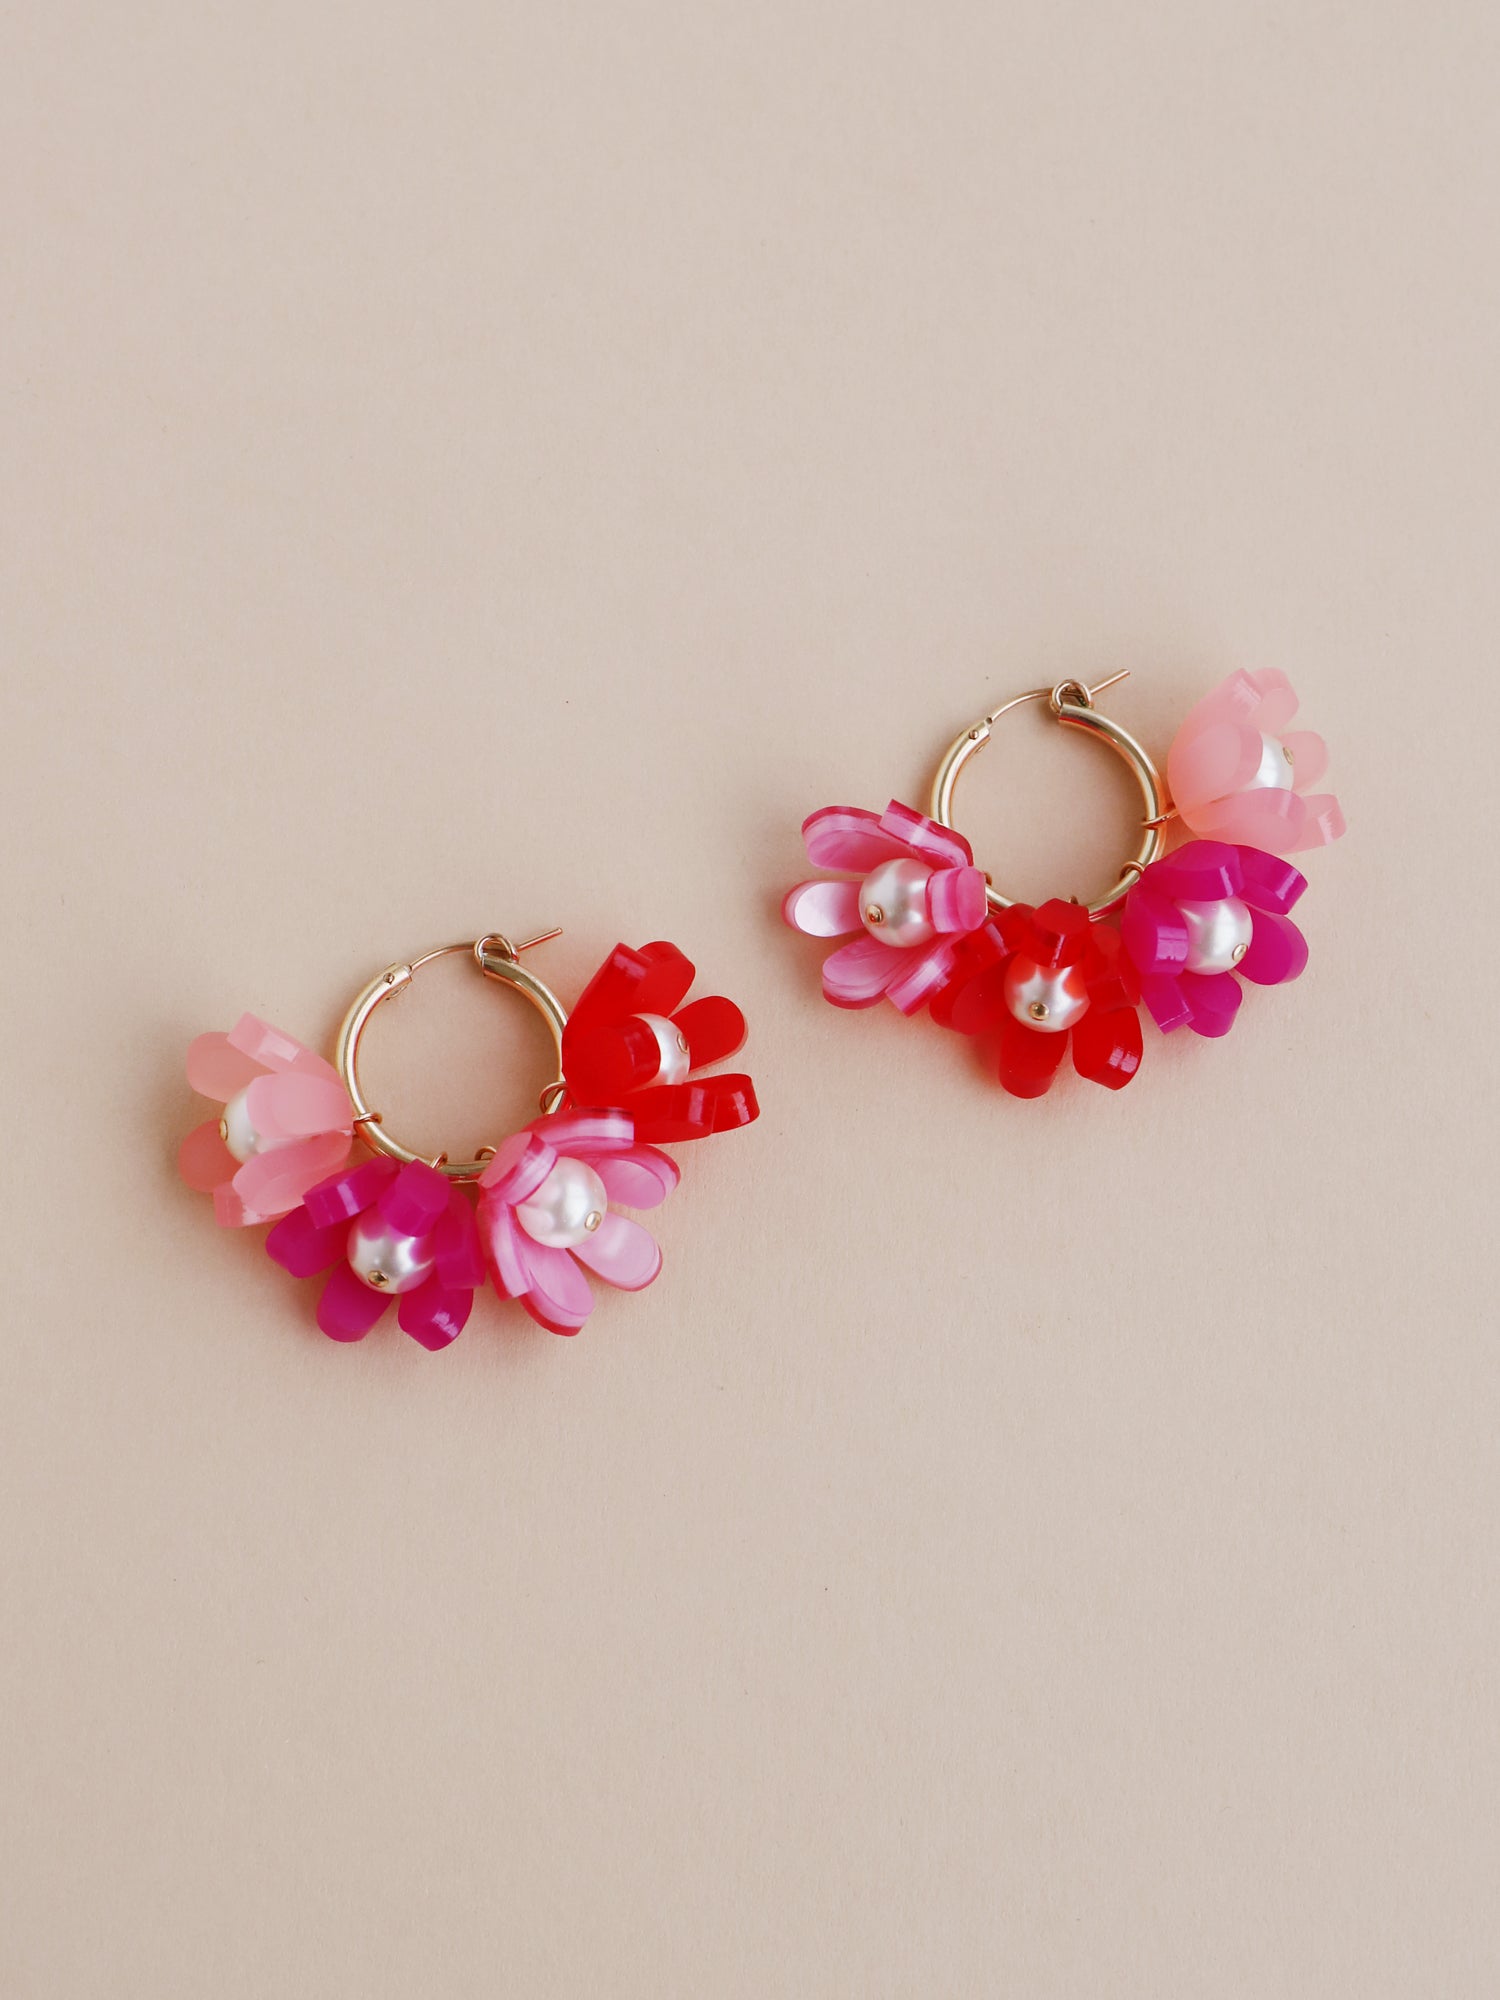 Statement tulip meadow hoop earrings with 8 interchangeable flowers in red & pink shades. Made from heat-formed acrylic with high quality glass pearls and 14k gold-filled findings. Handmade in the UK by Wolf & Moon.